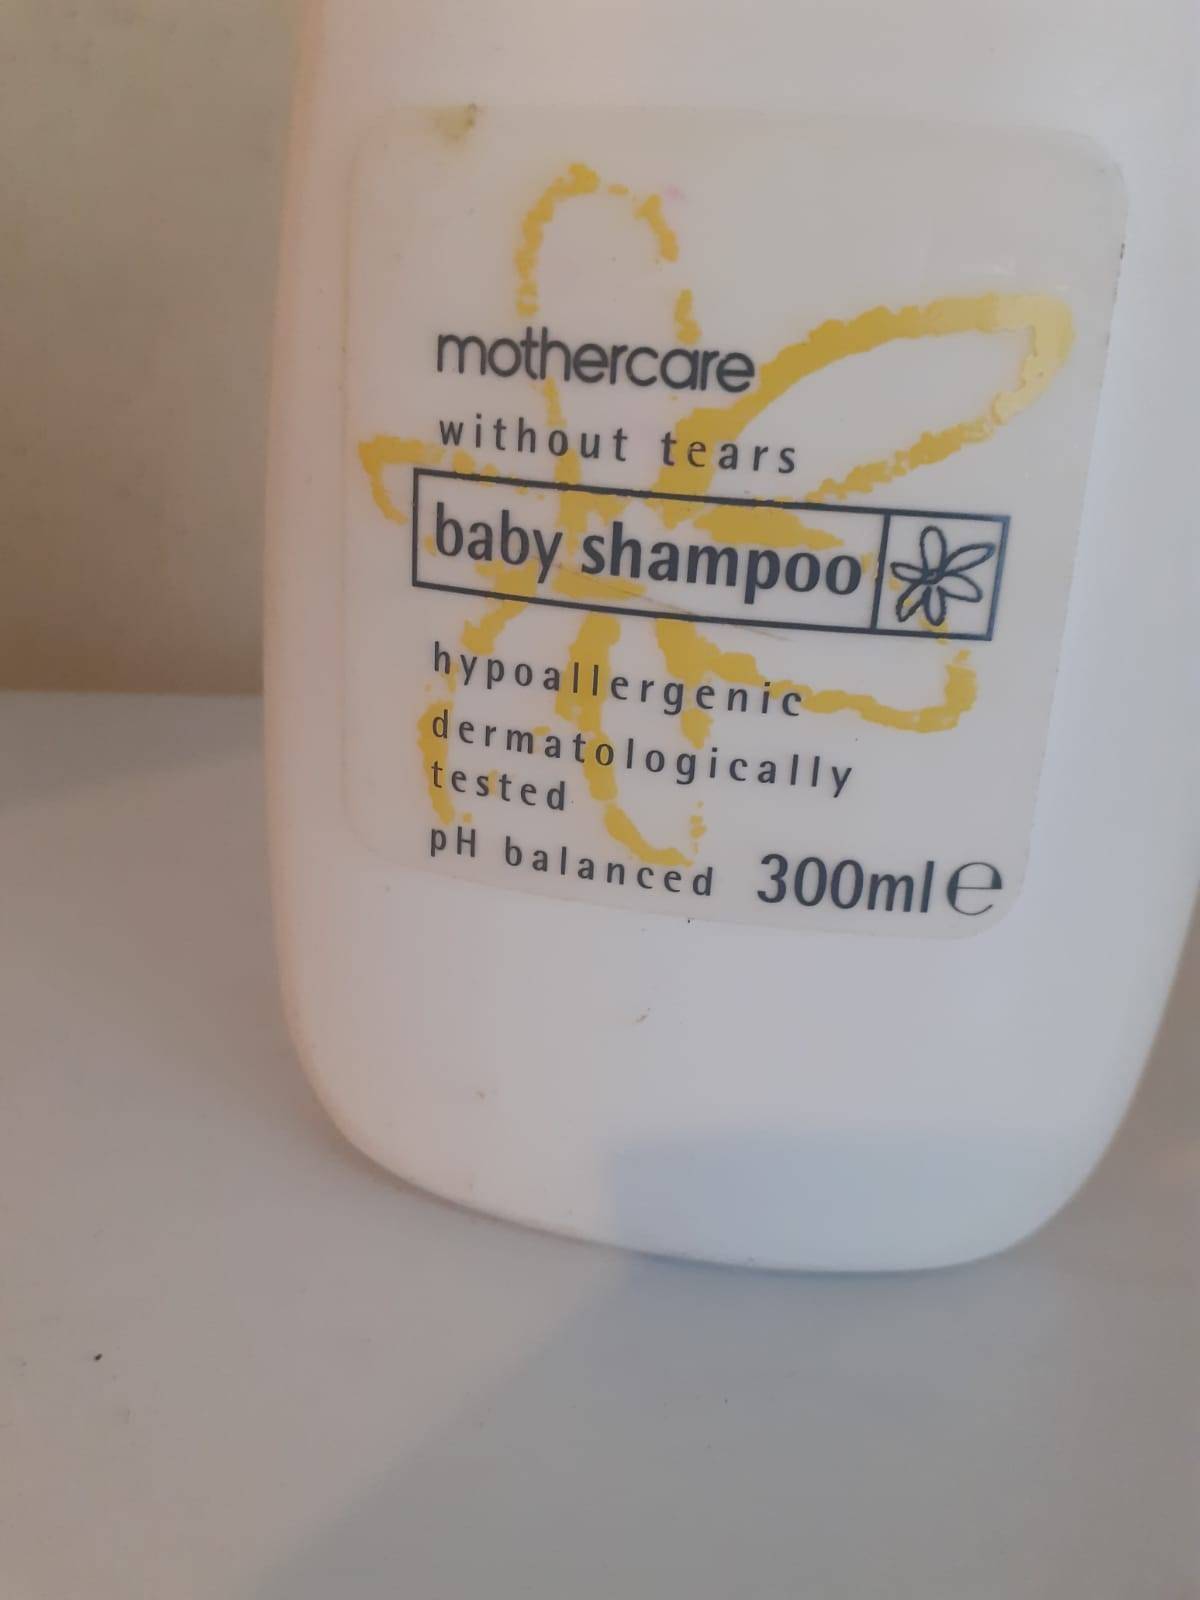 Primary image for Mothercare without tears baby shampoo